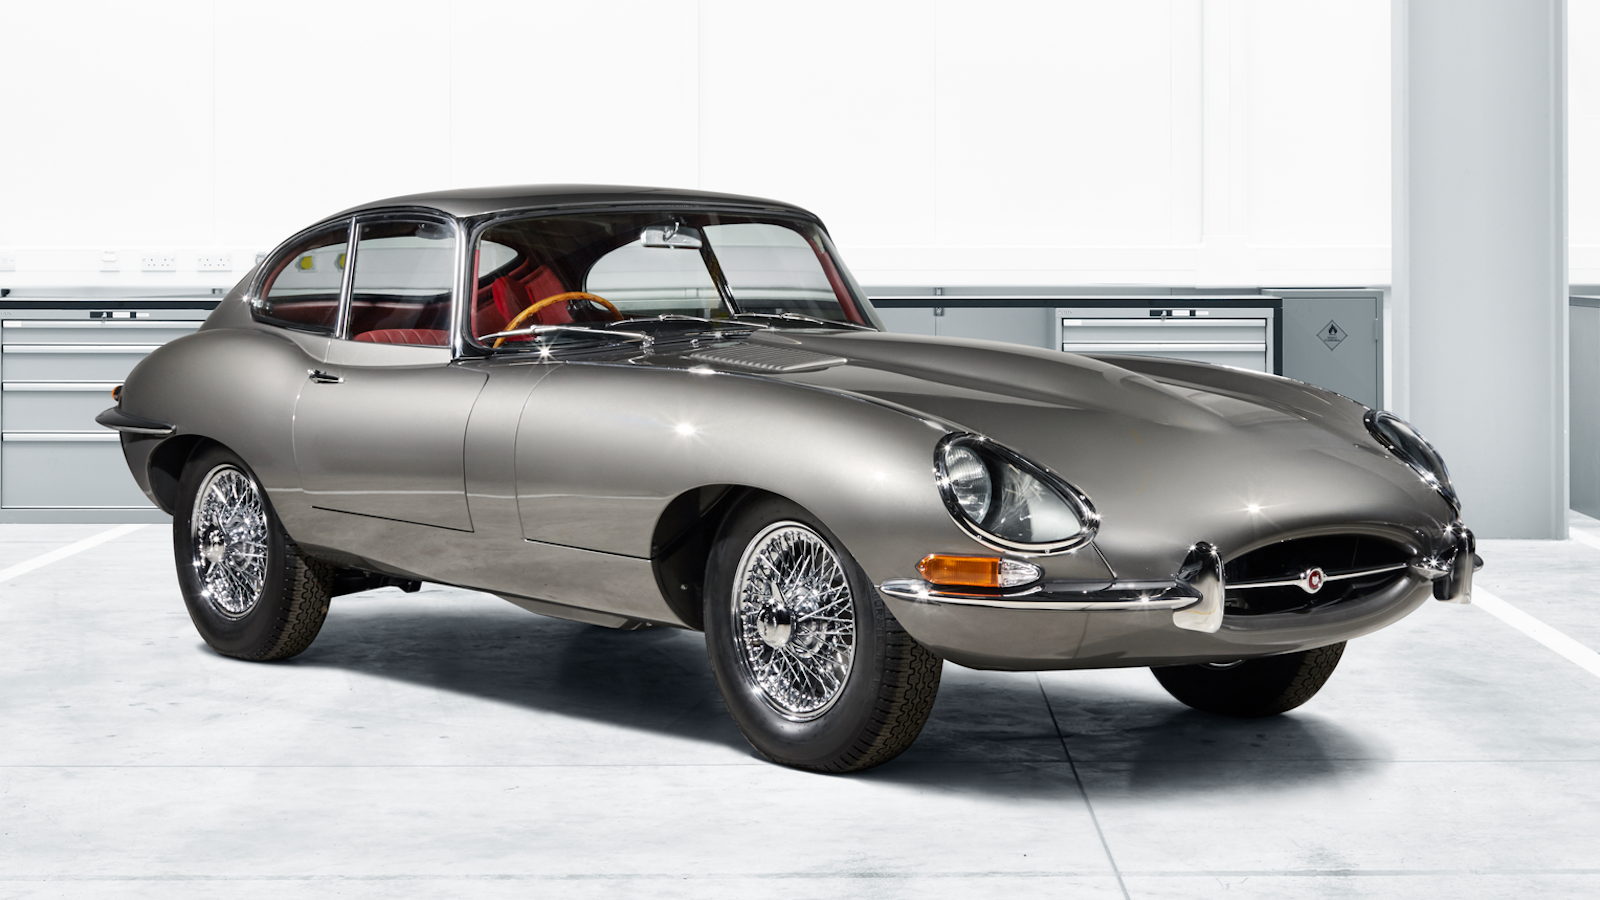 28 reasons the E-type won our hearts